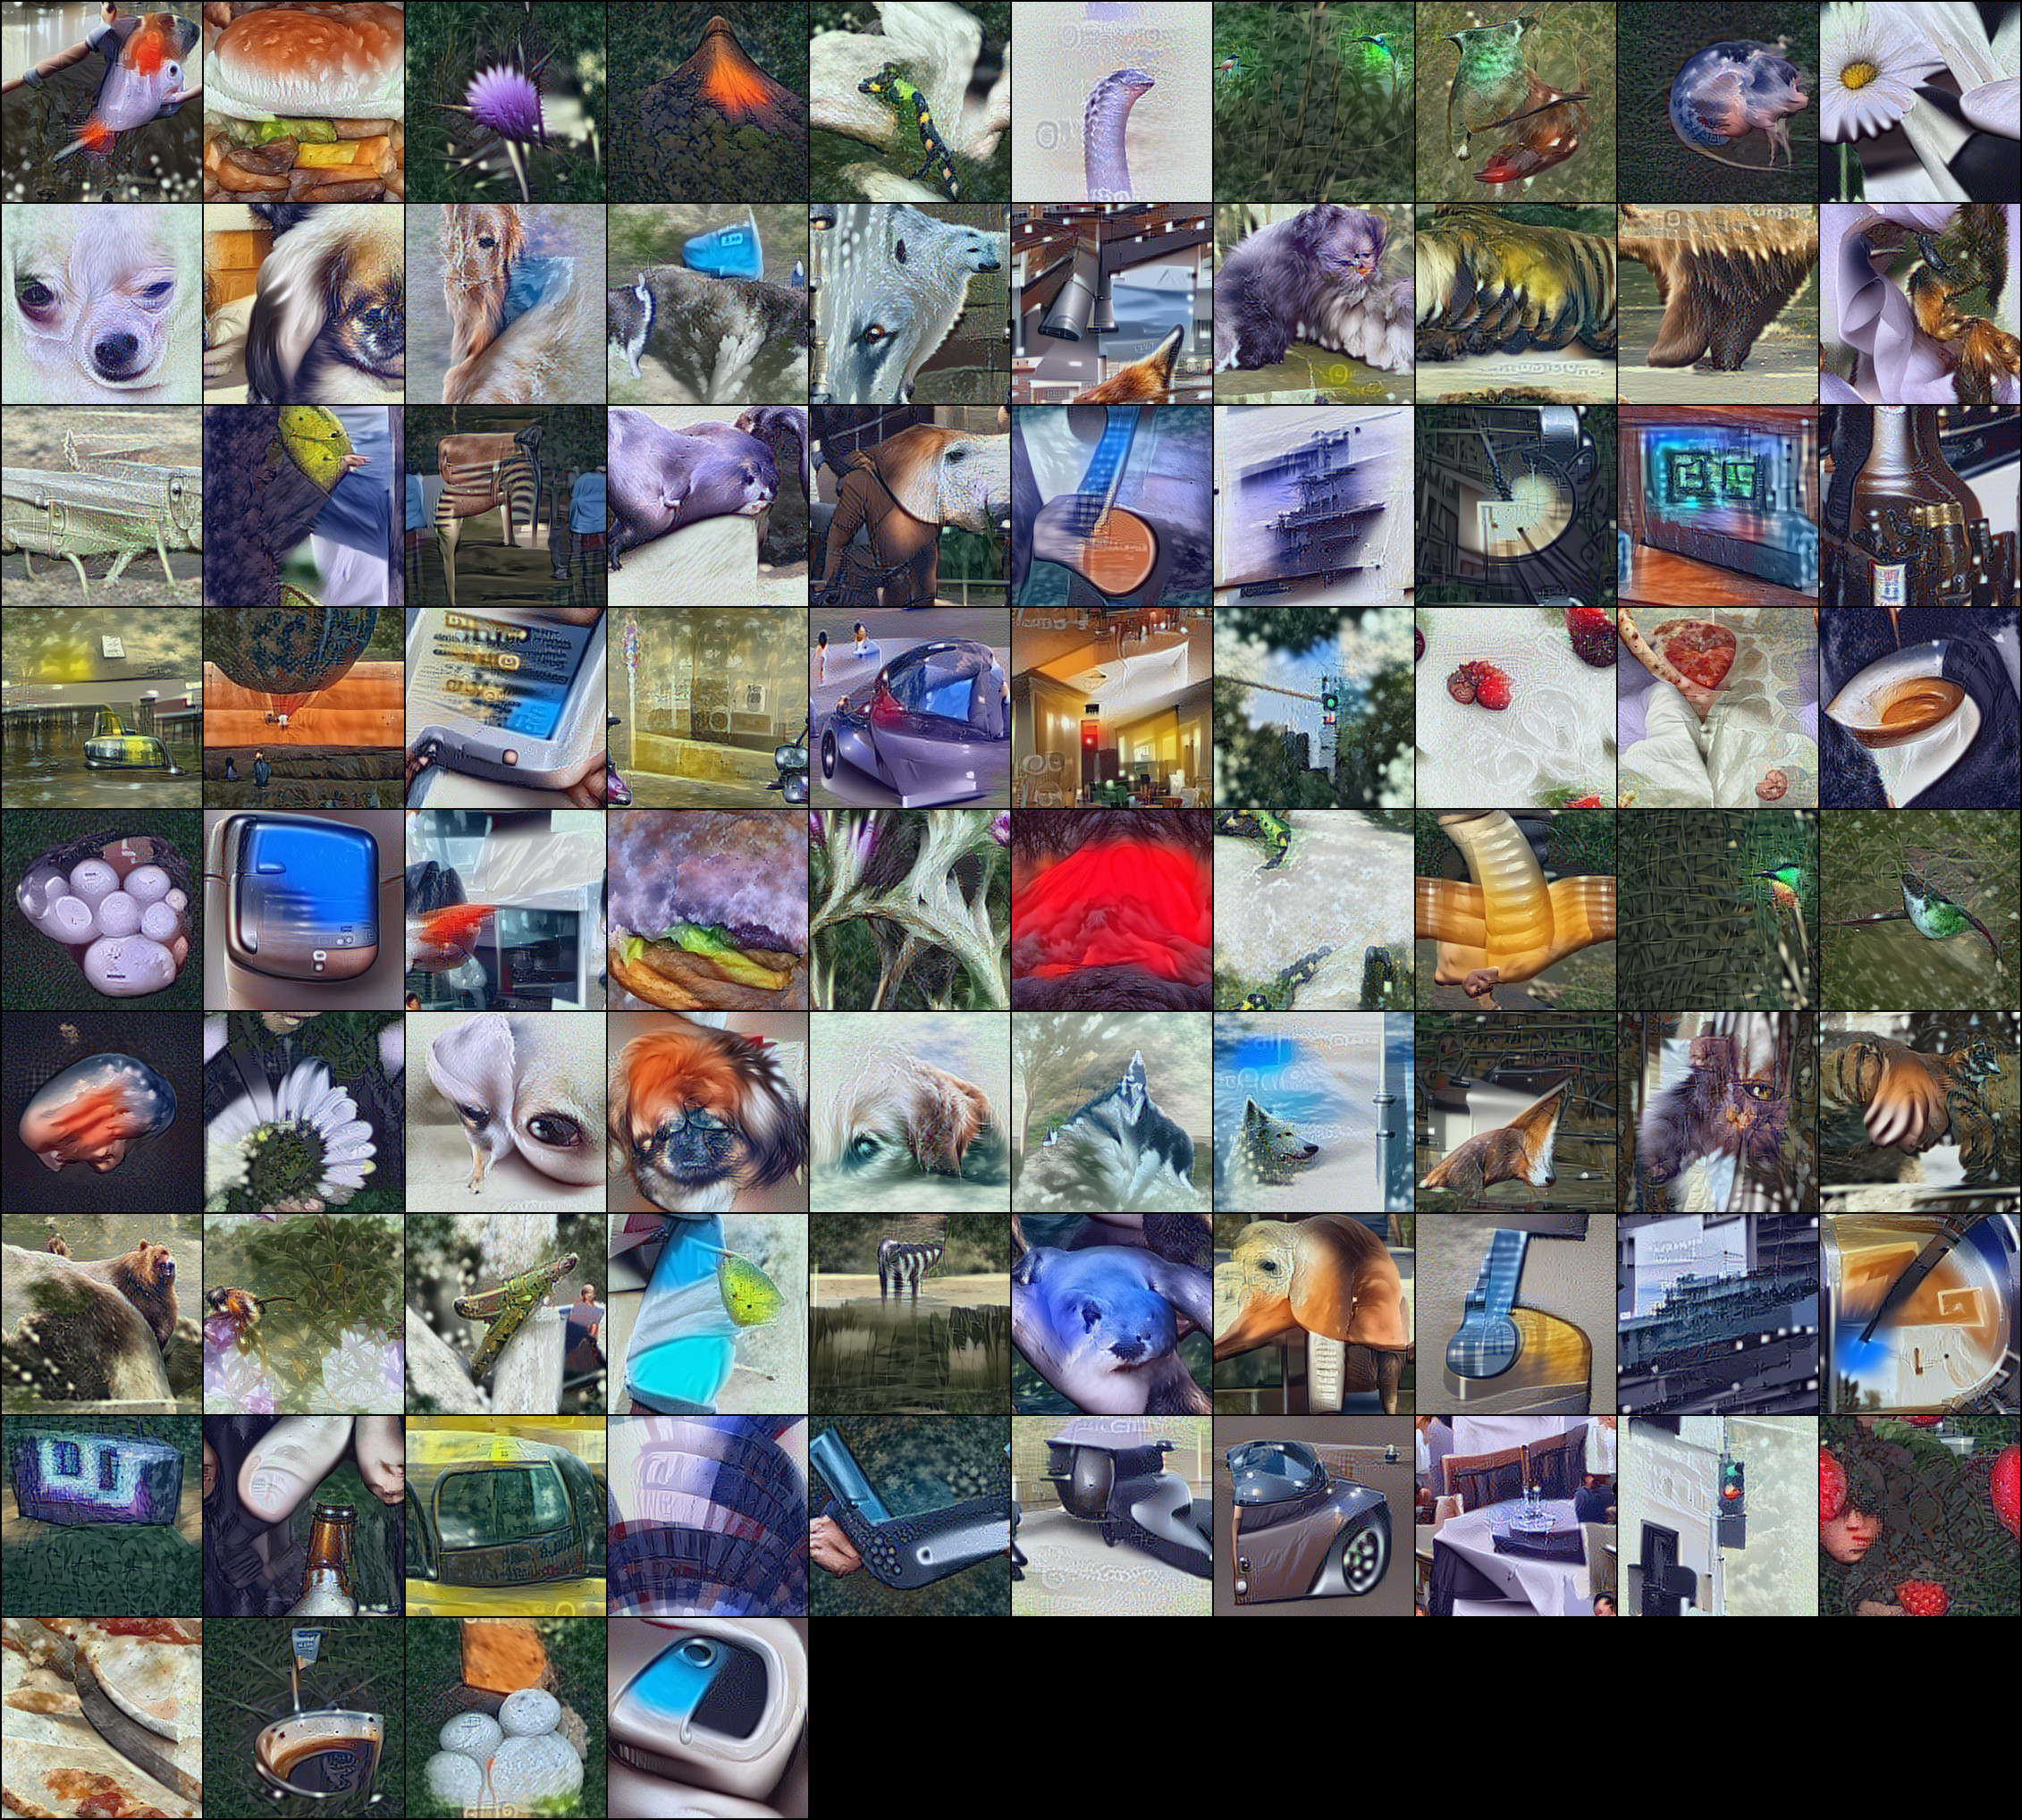 Generated grid of images